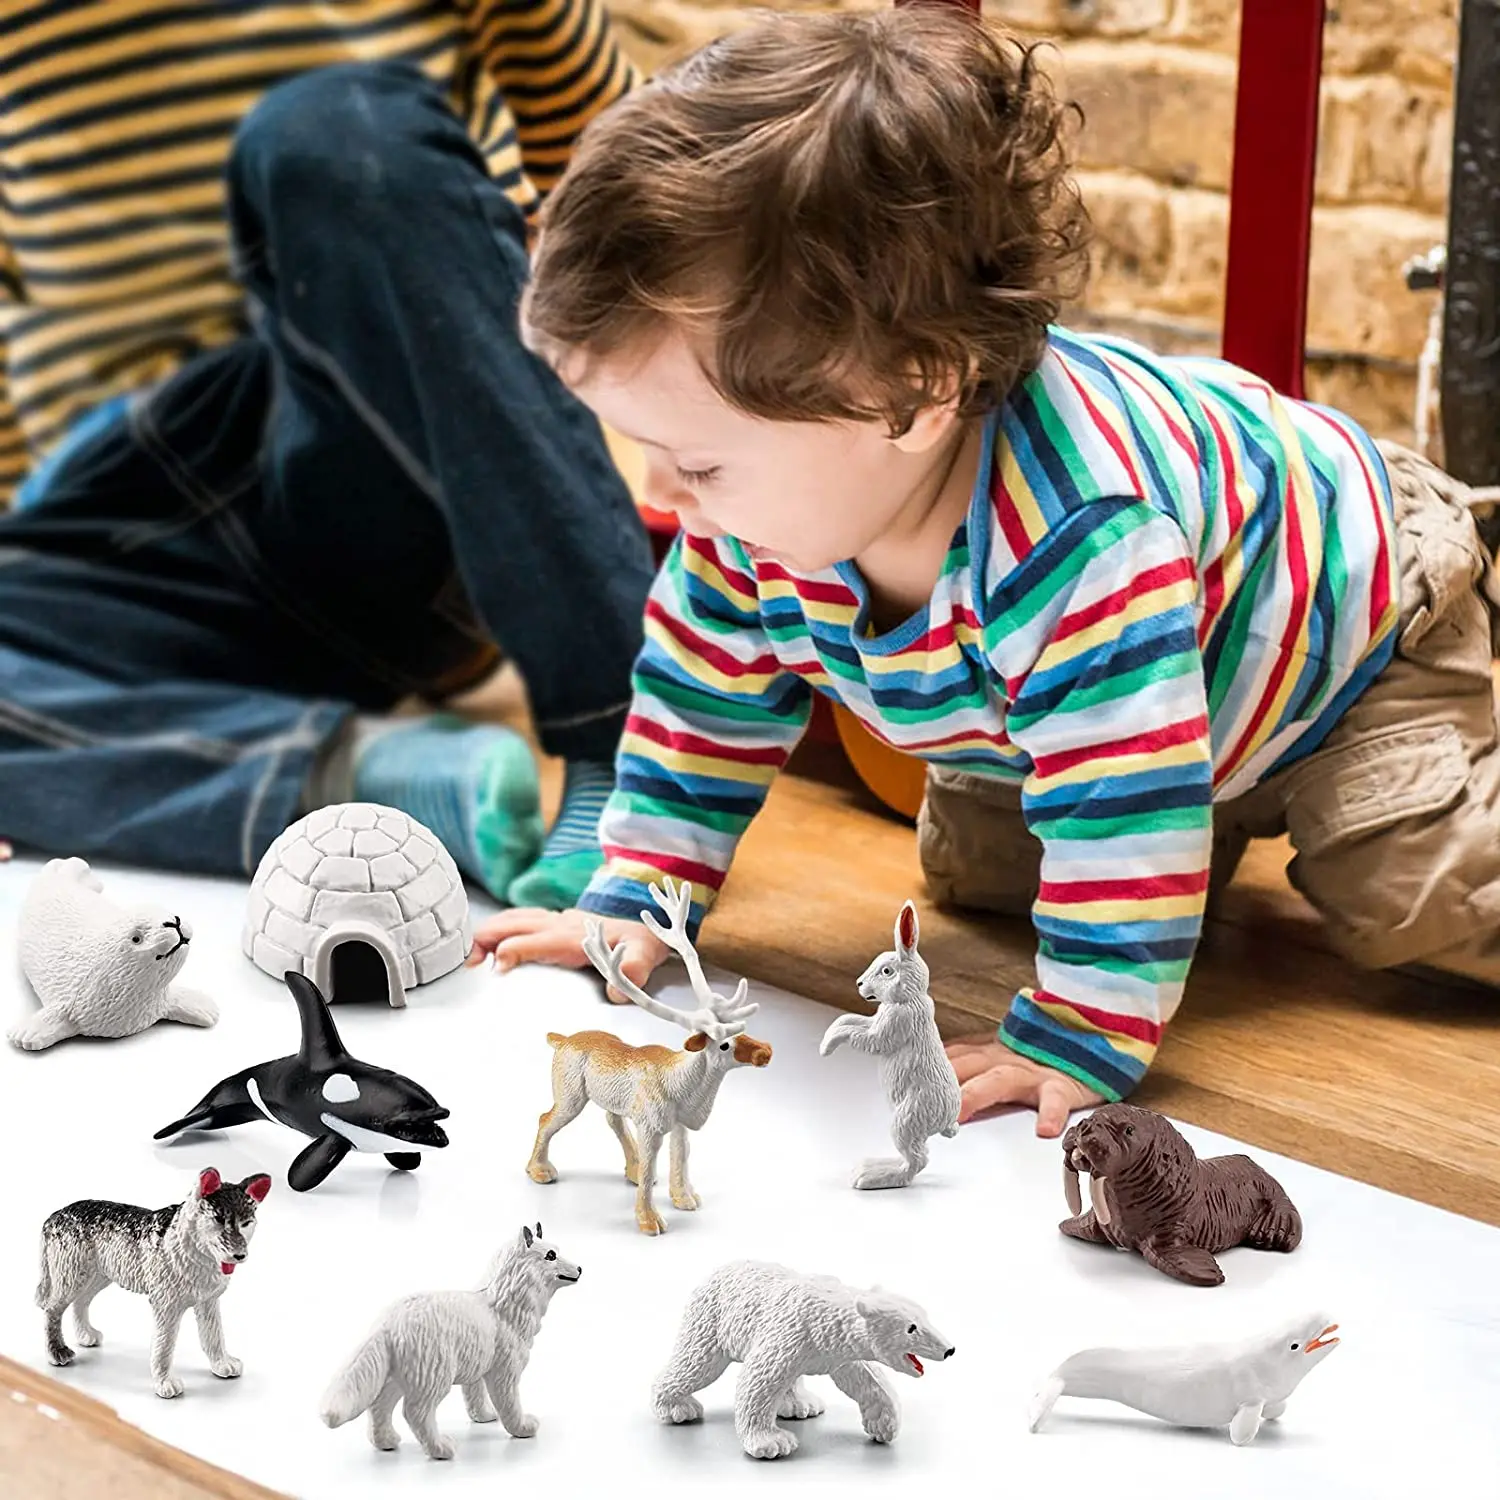 Mini Arctic Animals Toys Set 10pcs Polar Animal Figurines For Toddlers 1-2  Inch Plastic Arctic Tundra Deer Toy Animal - Buy Animals Toys,Plastic Toys,Cheap  Toys For Childrens Plastic Product on 